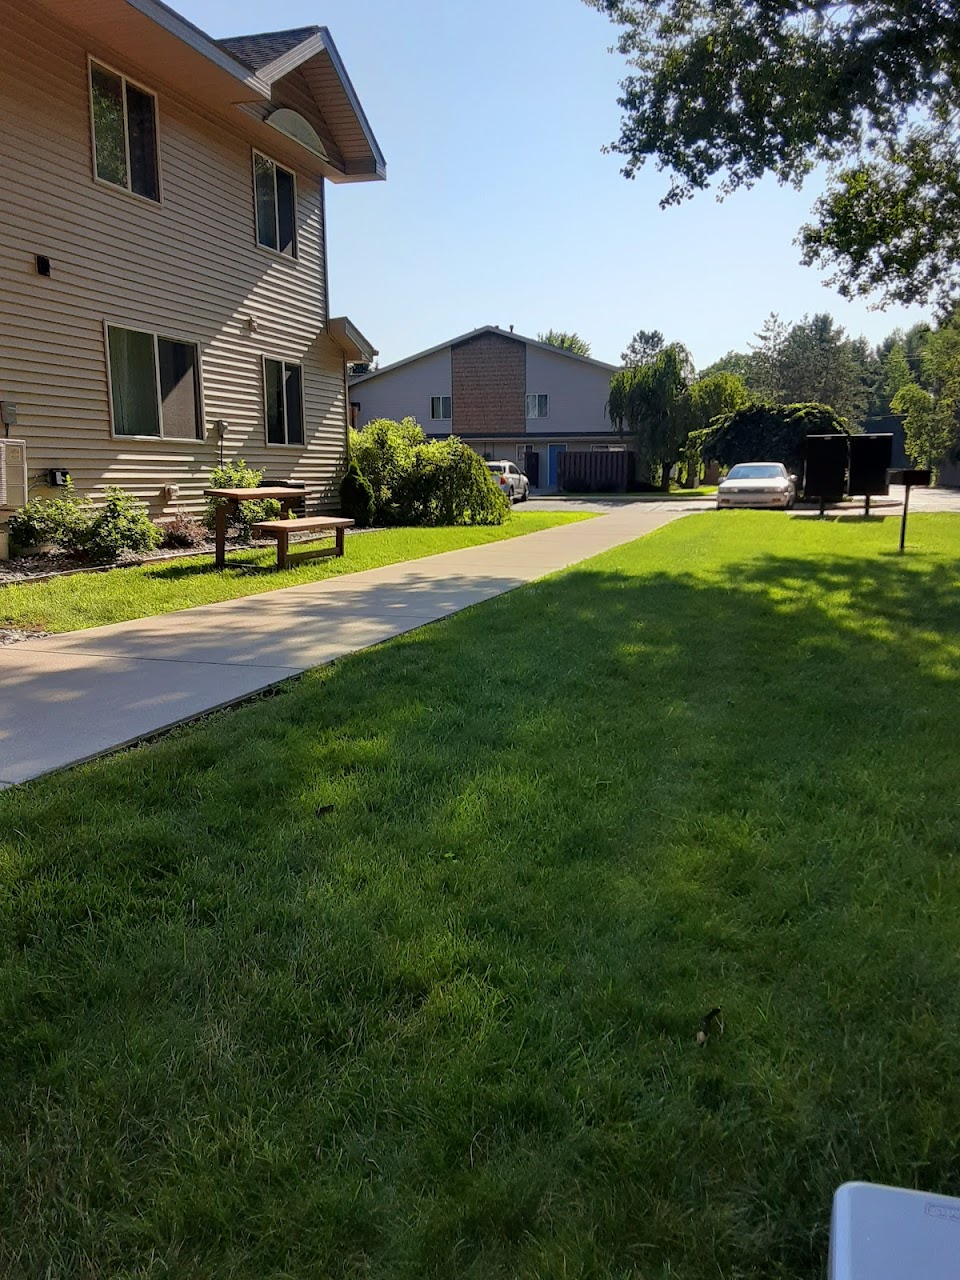 Photo of VILLAGE NORTH. Affordable housing located at 5190 CLENDENING RD GLADWIN, MI 48624